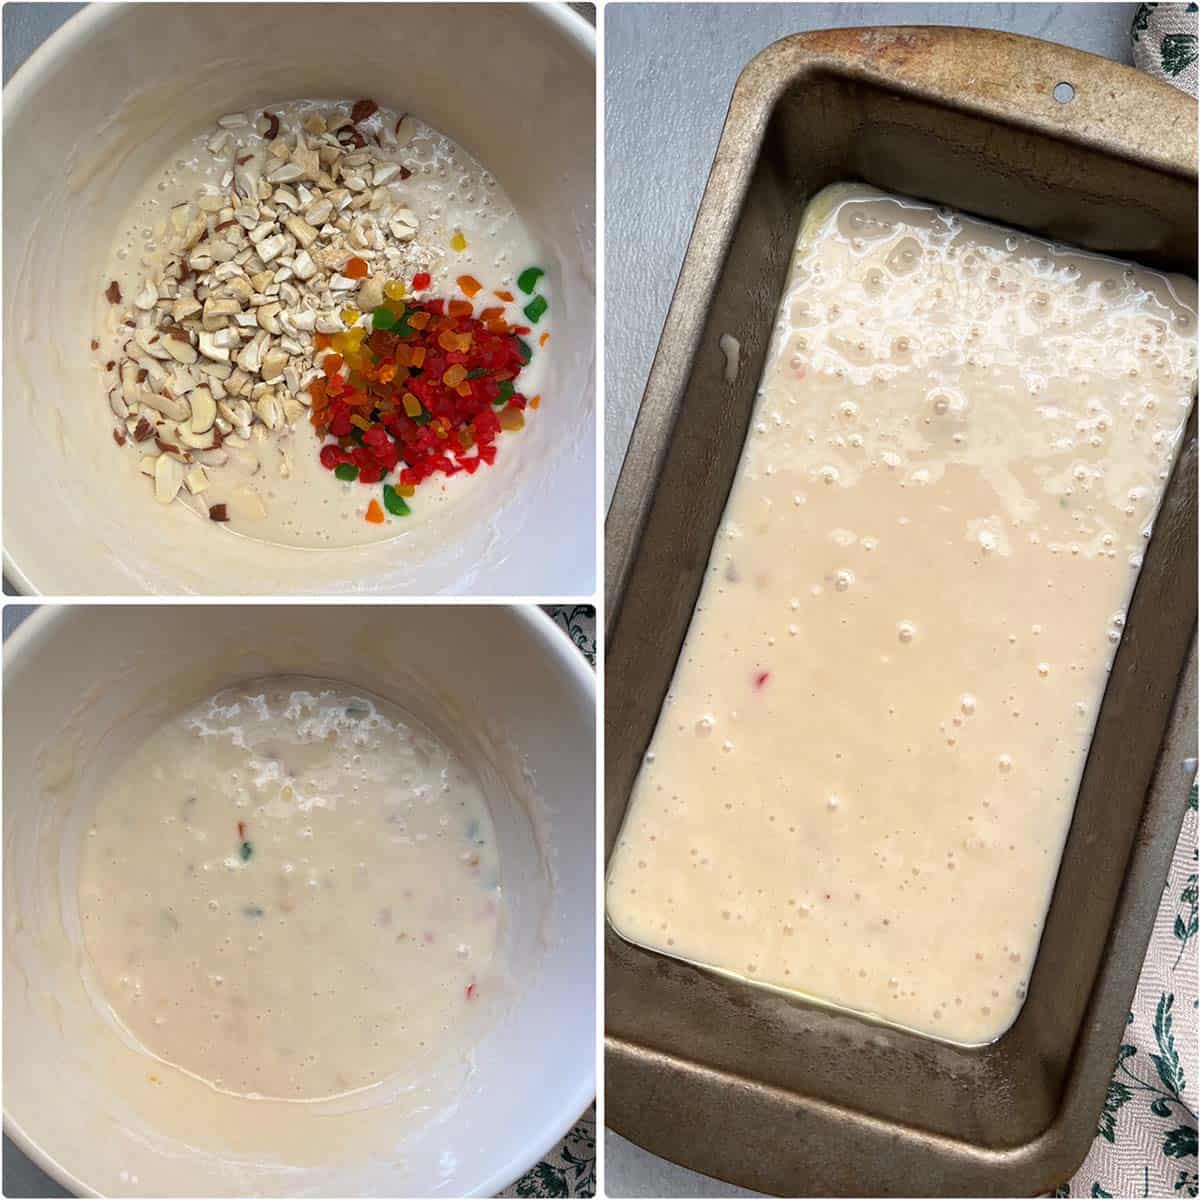 3 panel photo showing the addition of tutti frutti and nuts to the batter and pouring the batter into loaf pan.